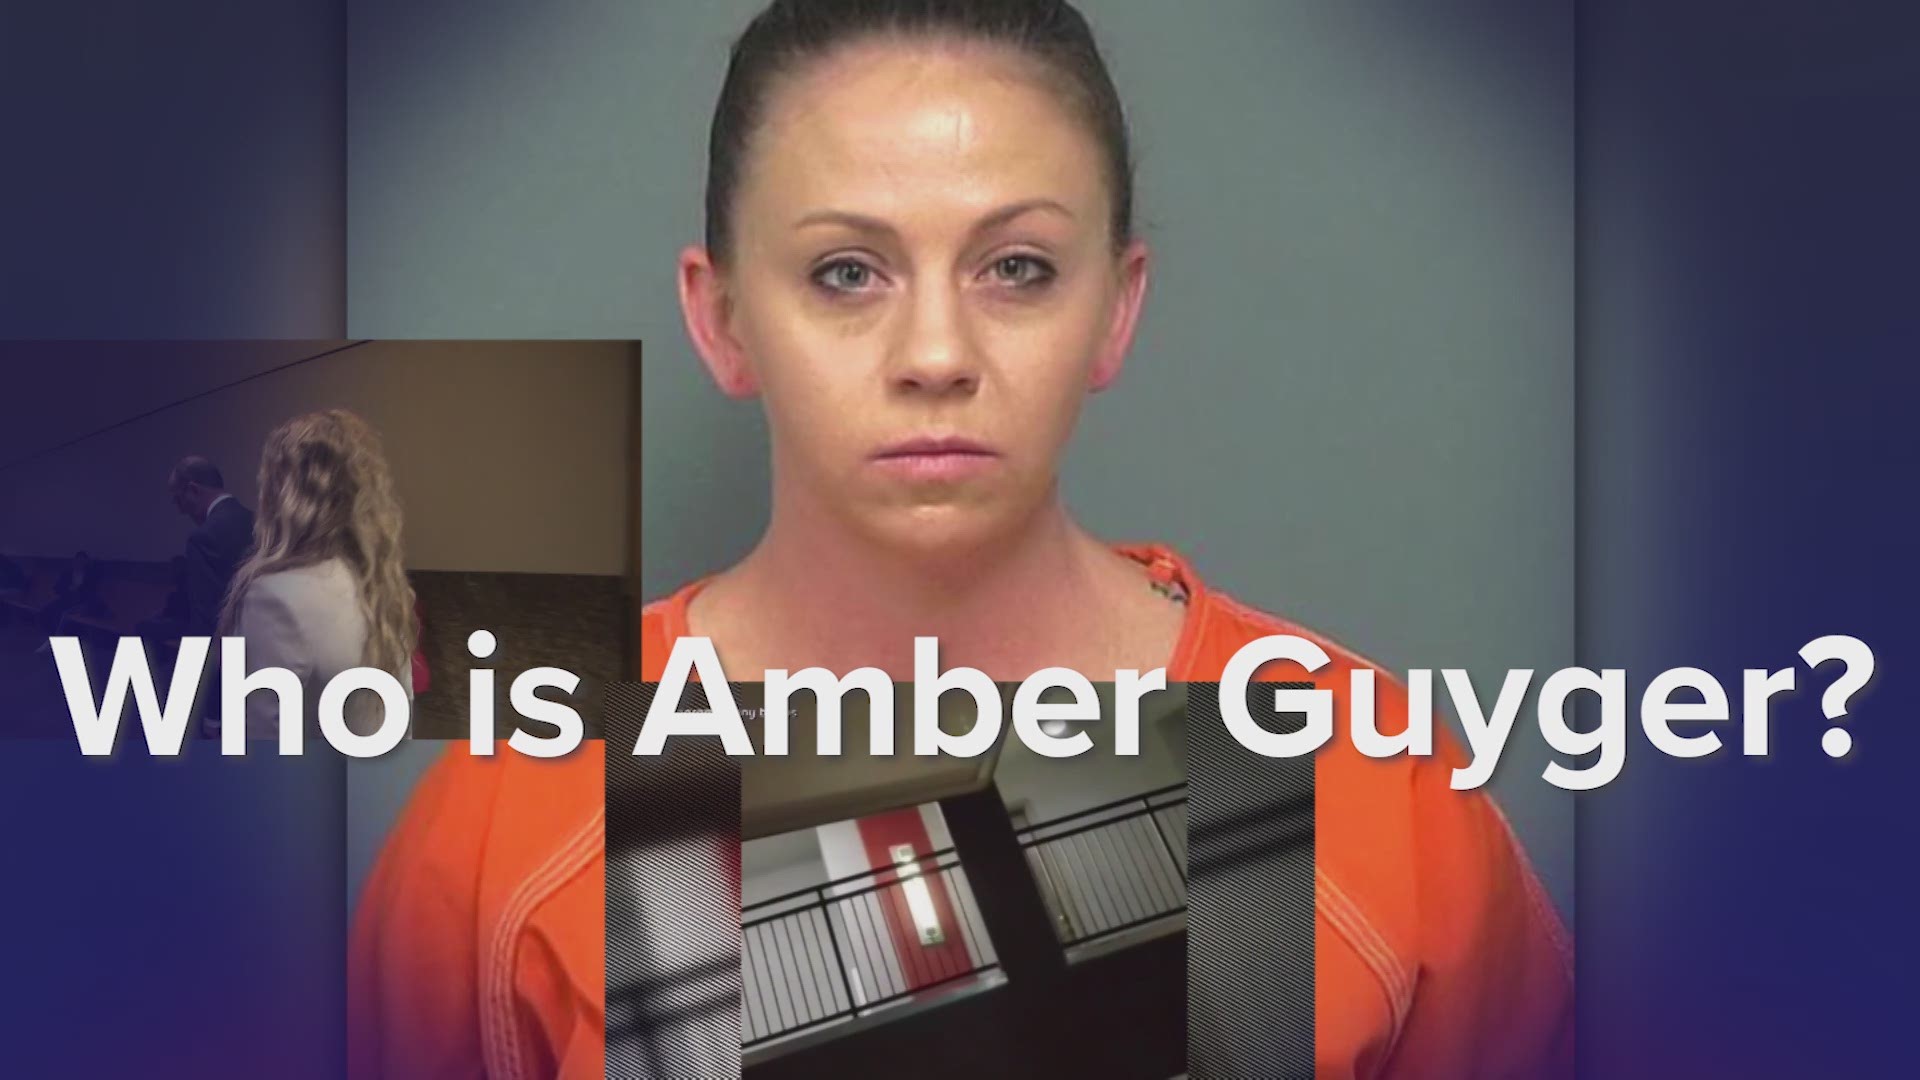 Who is Amber Guyger? Facts and information about Amber Guyger.